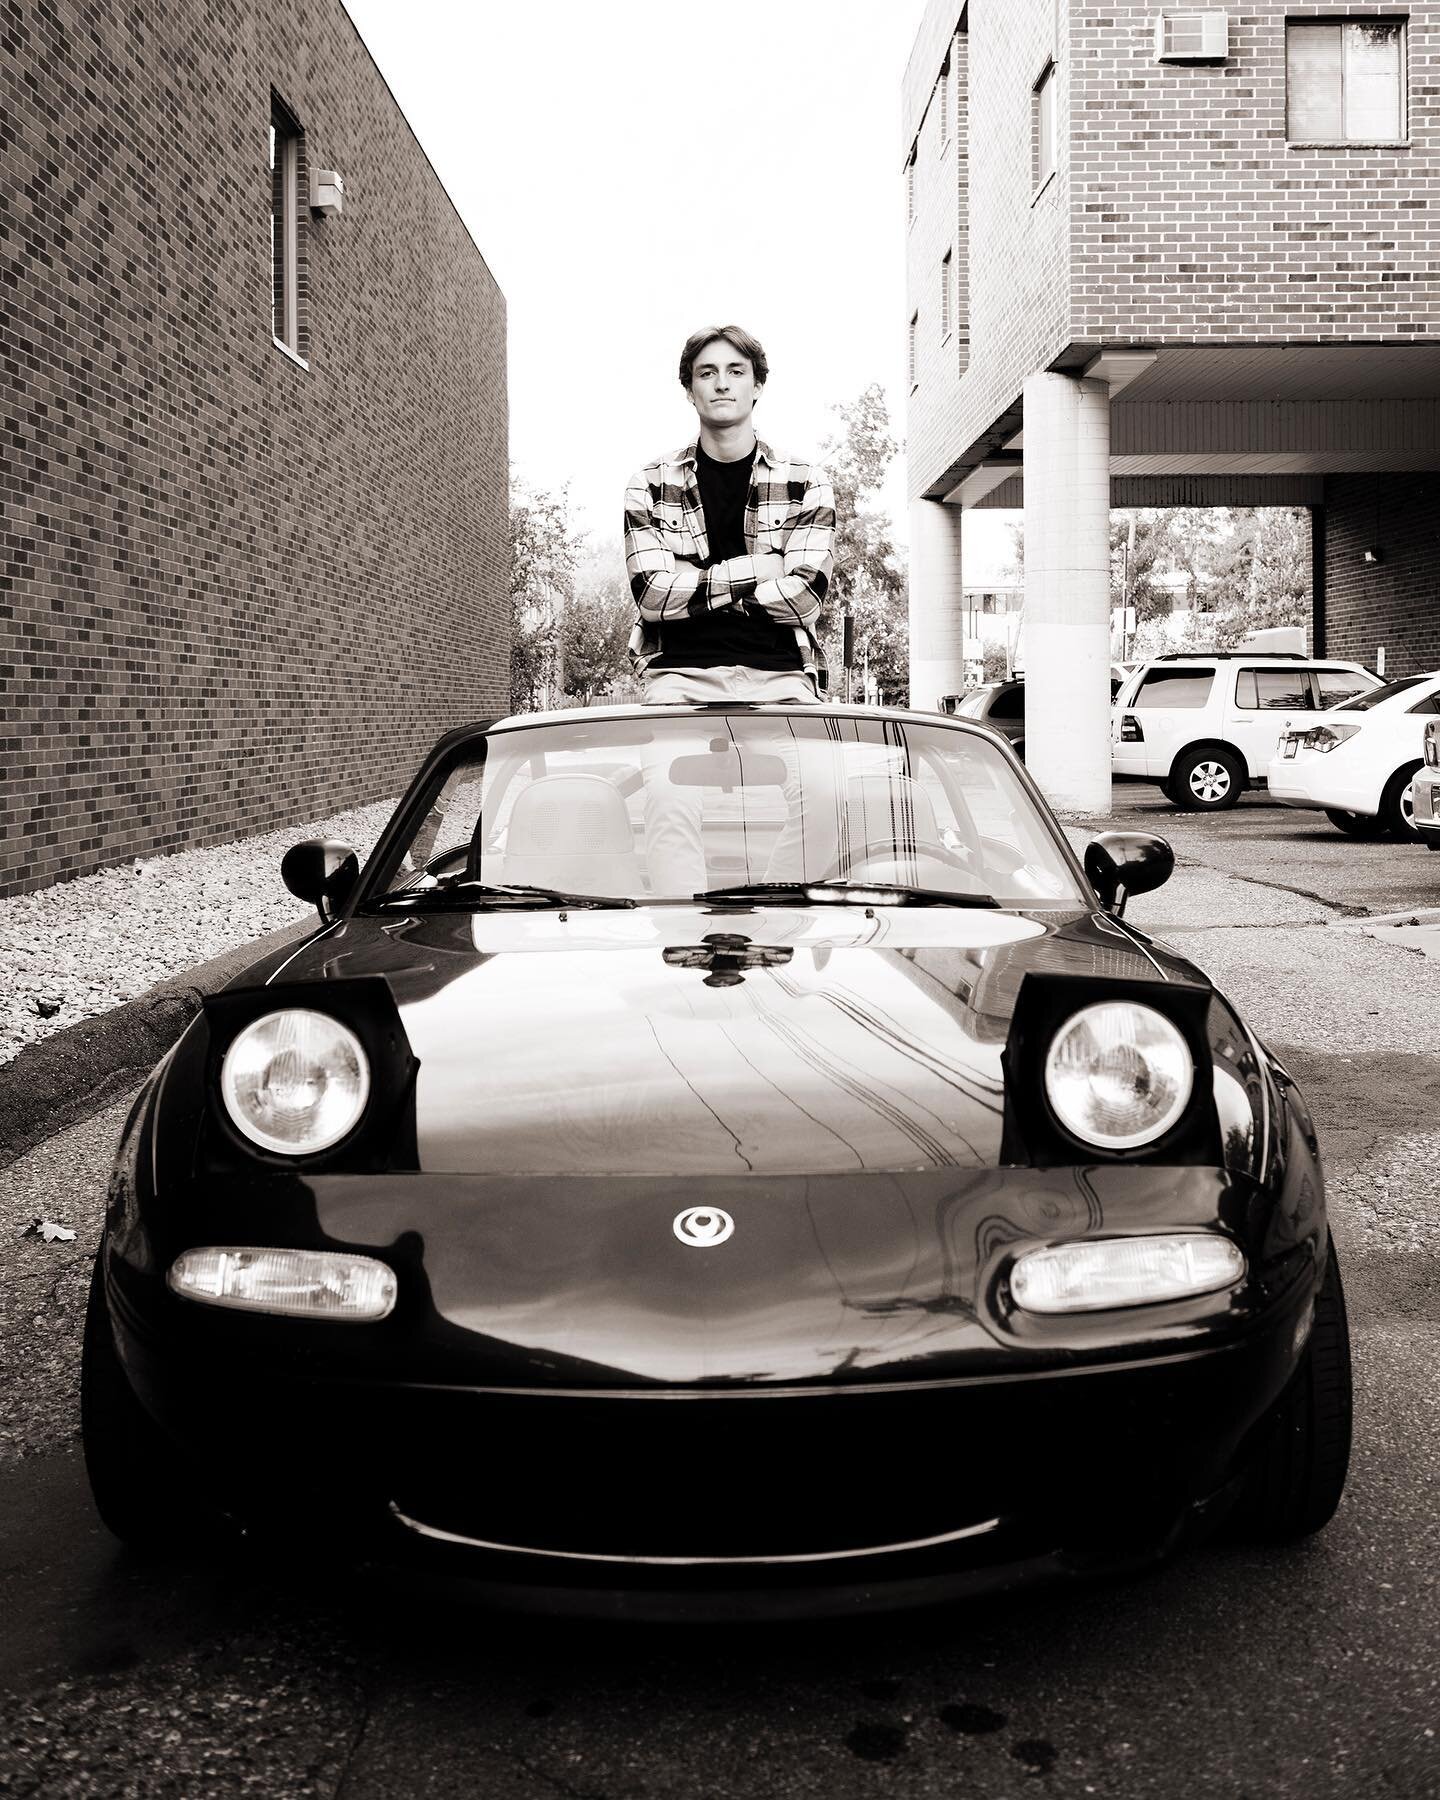 Class of 2023 - Josh &amp; his sweet little &lsquo;97 #Miata. (Thanks for giving me a ride to the alley - fun little car!) Great shoot! @sauersearle @the_searle 
.
#hudsonwi #classof2023 #rightofpassage #seniorphotos #seniorpictures #mazdamiata